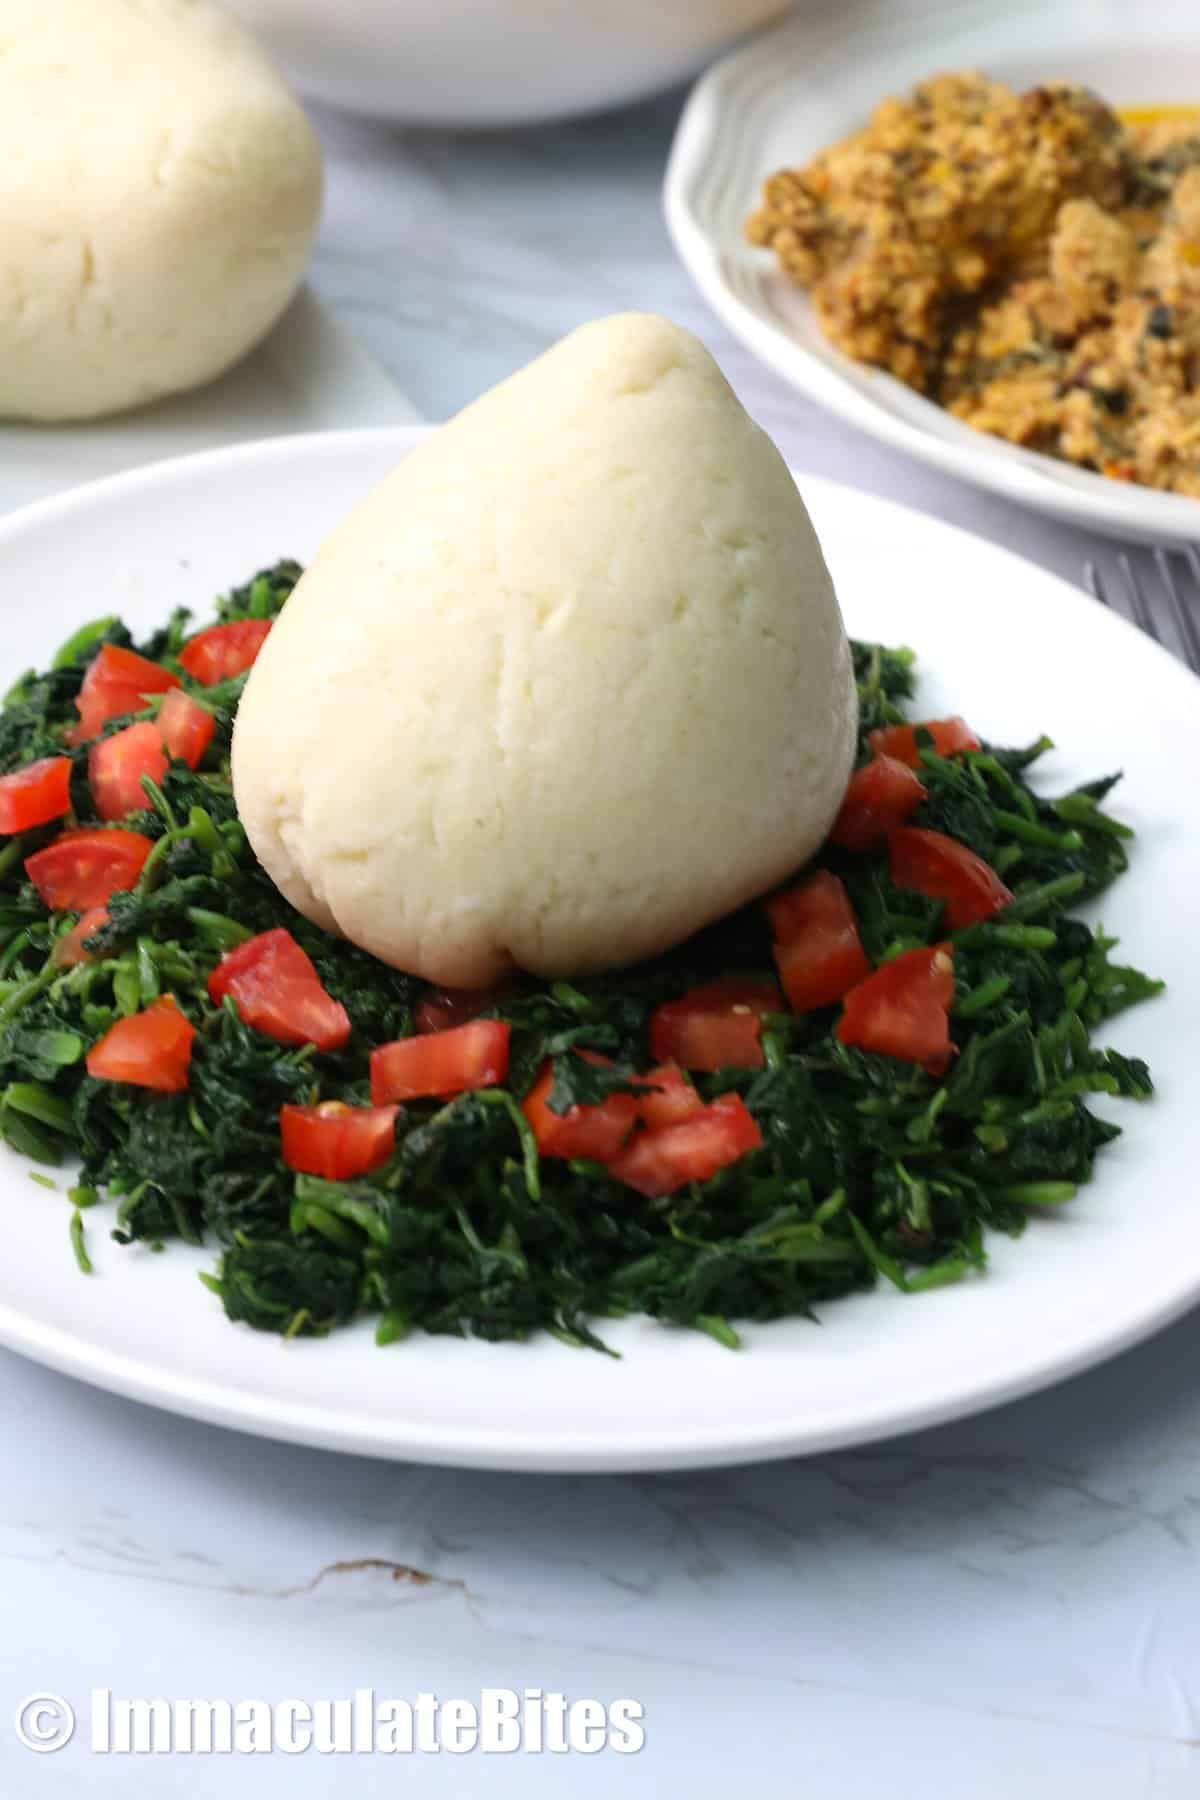 Ugali (corn fufu) on top a plateful of African-style greens